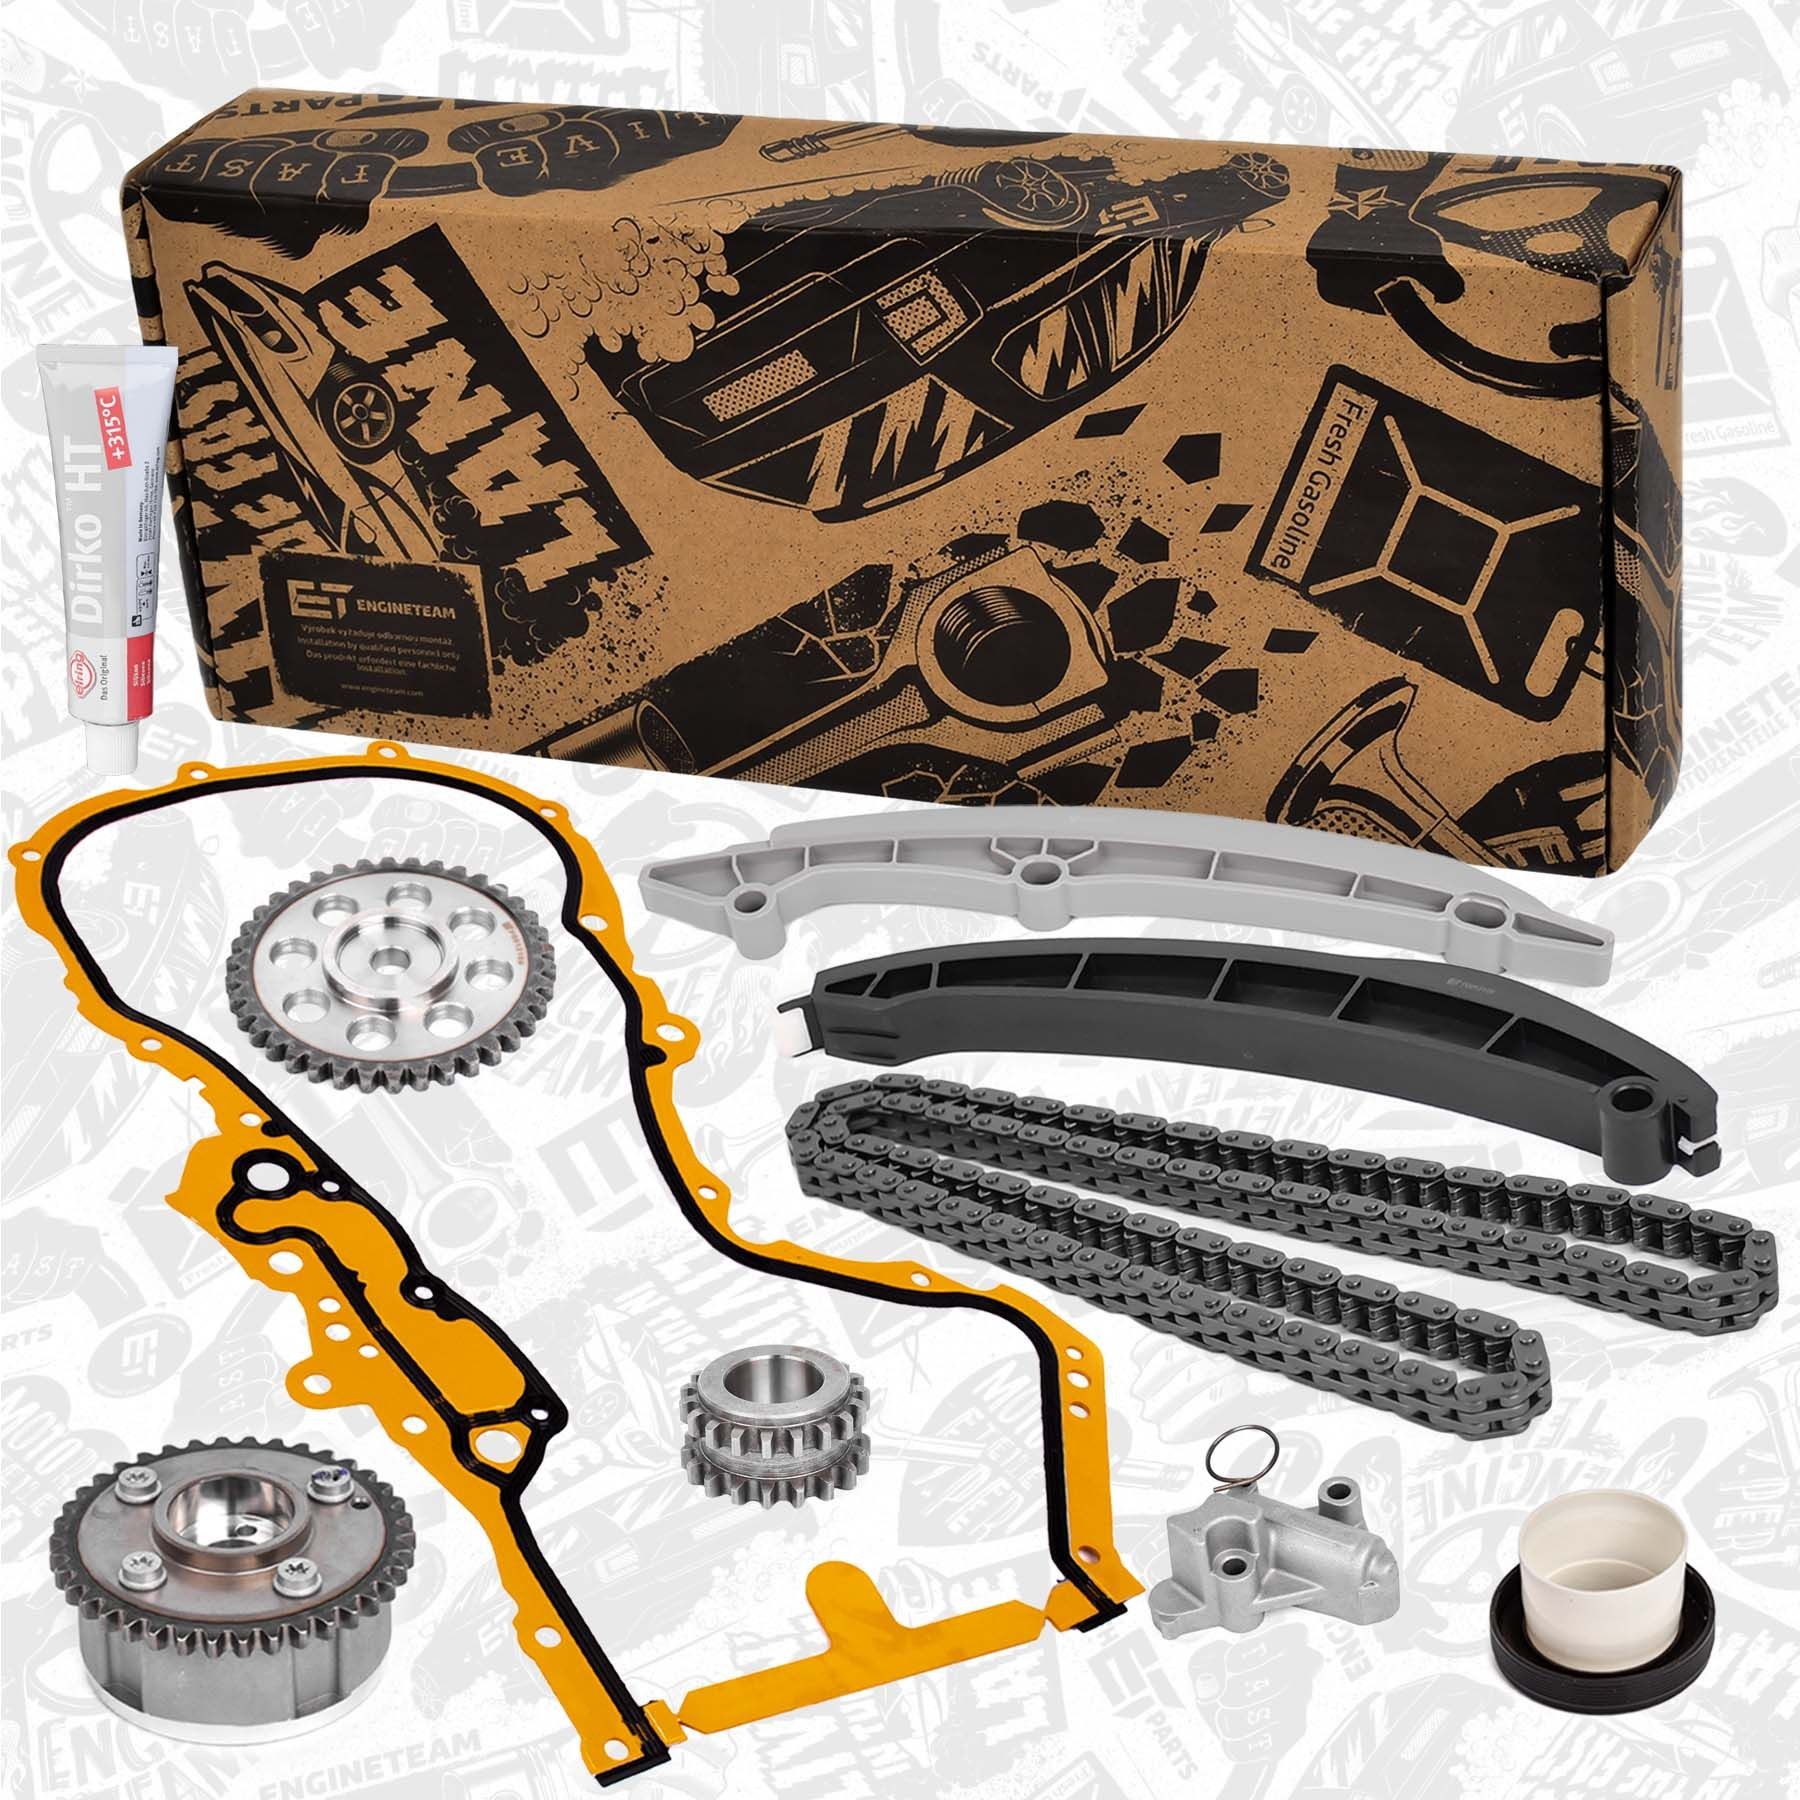 ET ENGINETEAM RS0103VR2 Timing chain kit with crankshaft seal, with gaskets/seals, Silent Chain, Closed chain